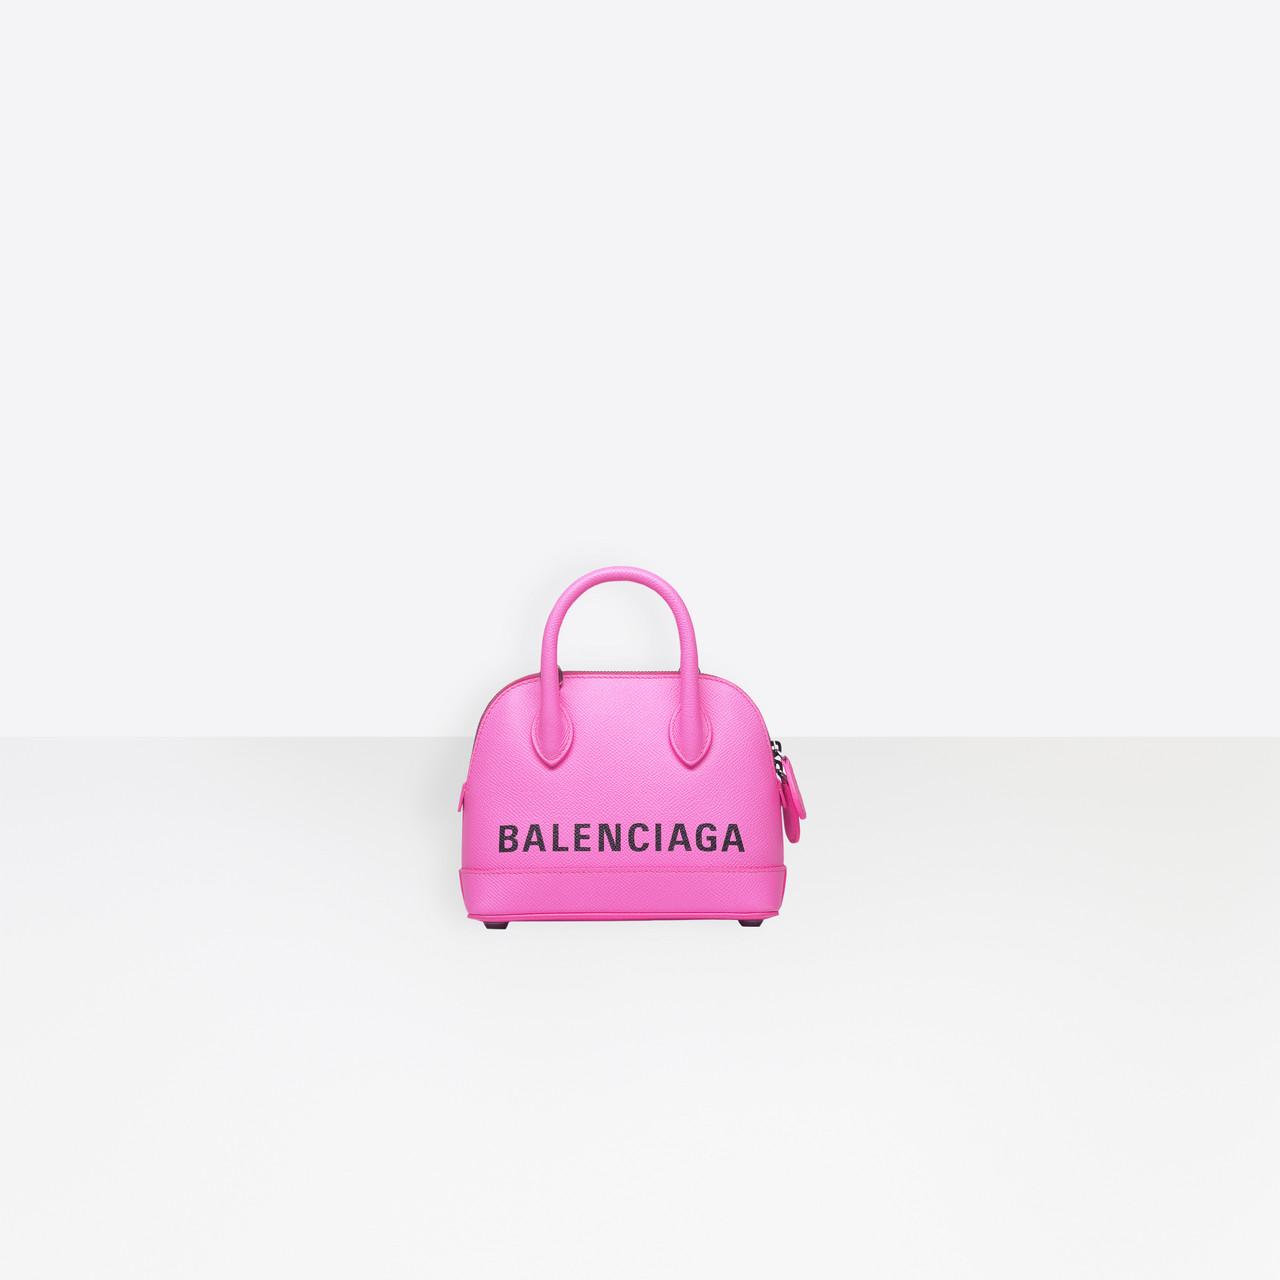 Balenciaga Leather Ville Xxs Top Handle Bag in Neon Pink (Pink) | Lyst